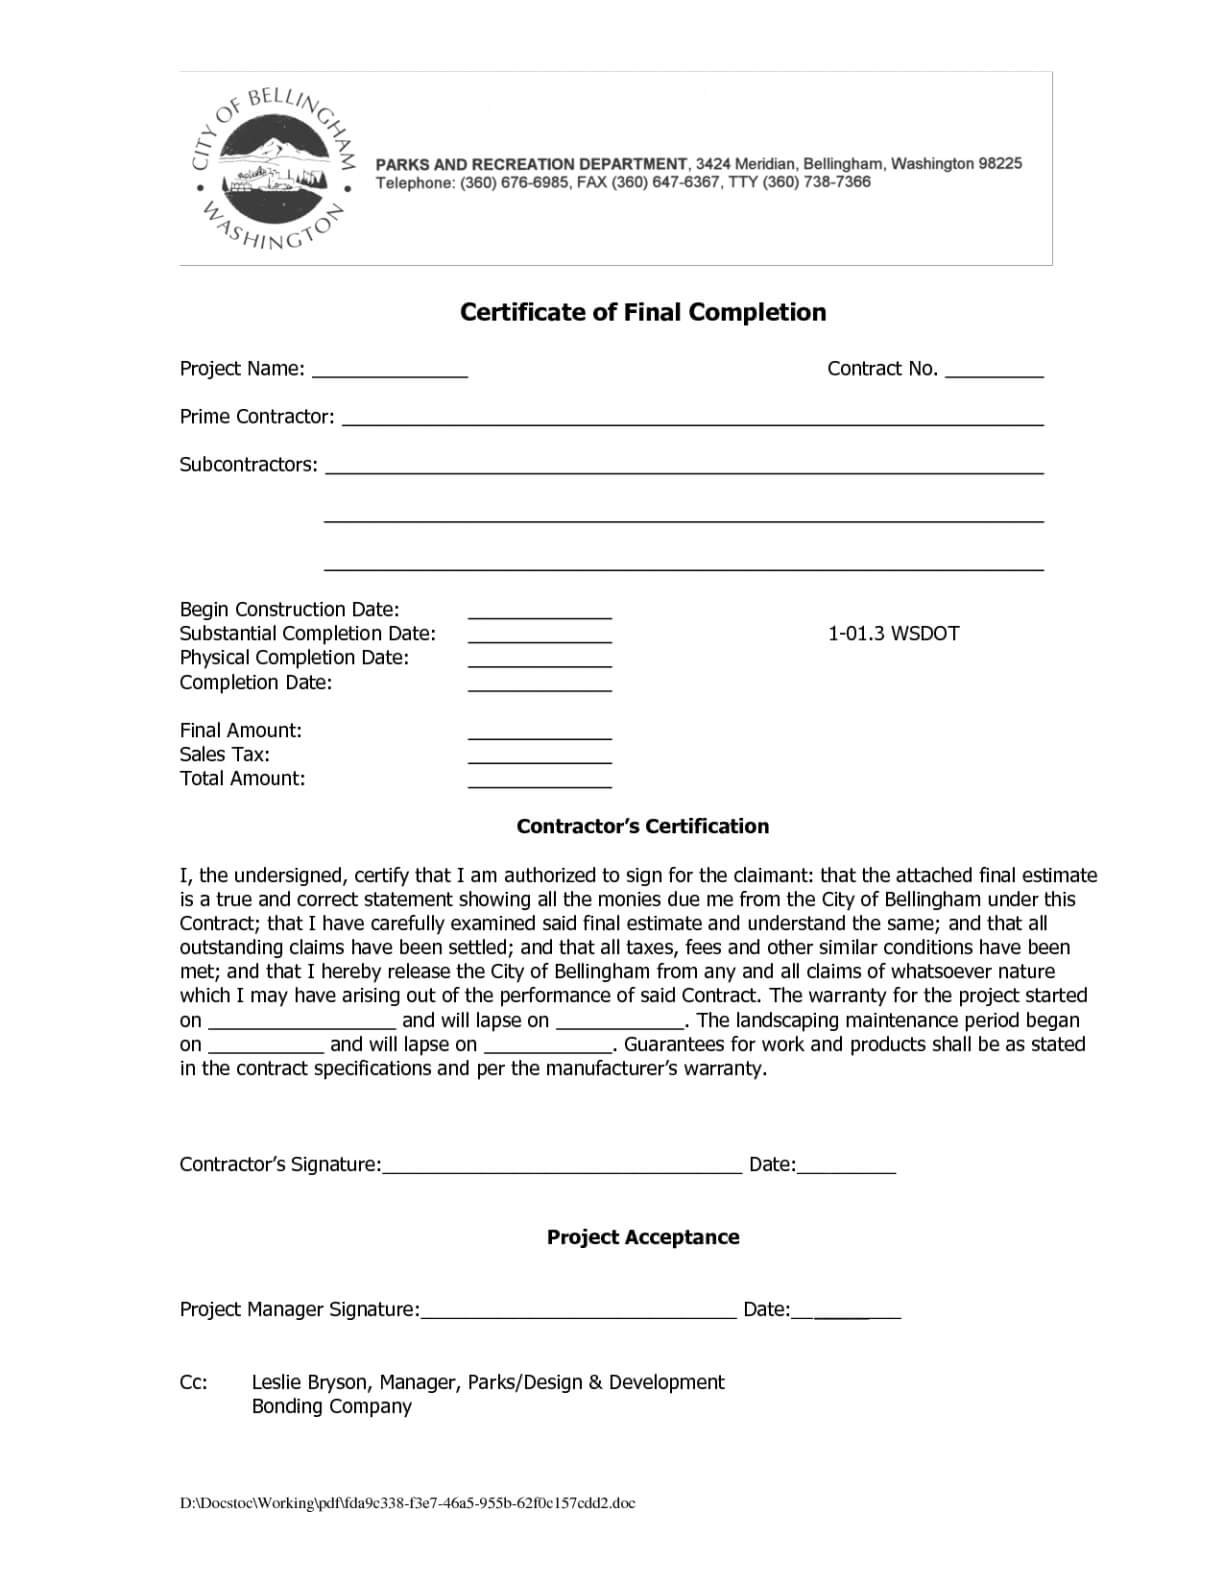 Certificate Of Work Completion Templates 4 – Elsik Blue Cetane Regarding Certificate Of Completion Construction Templates